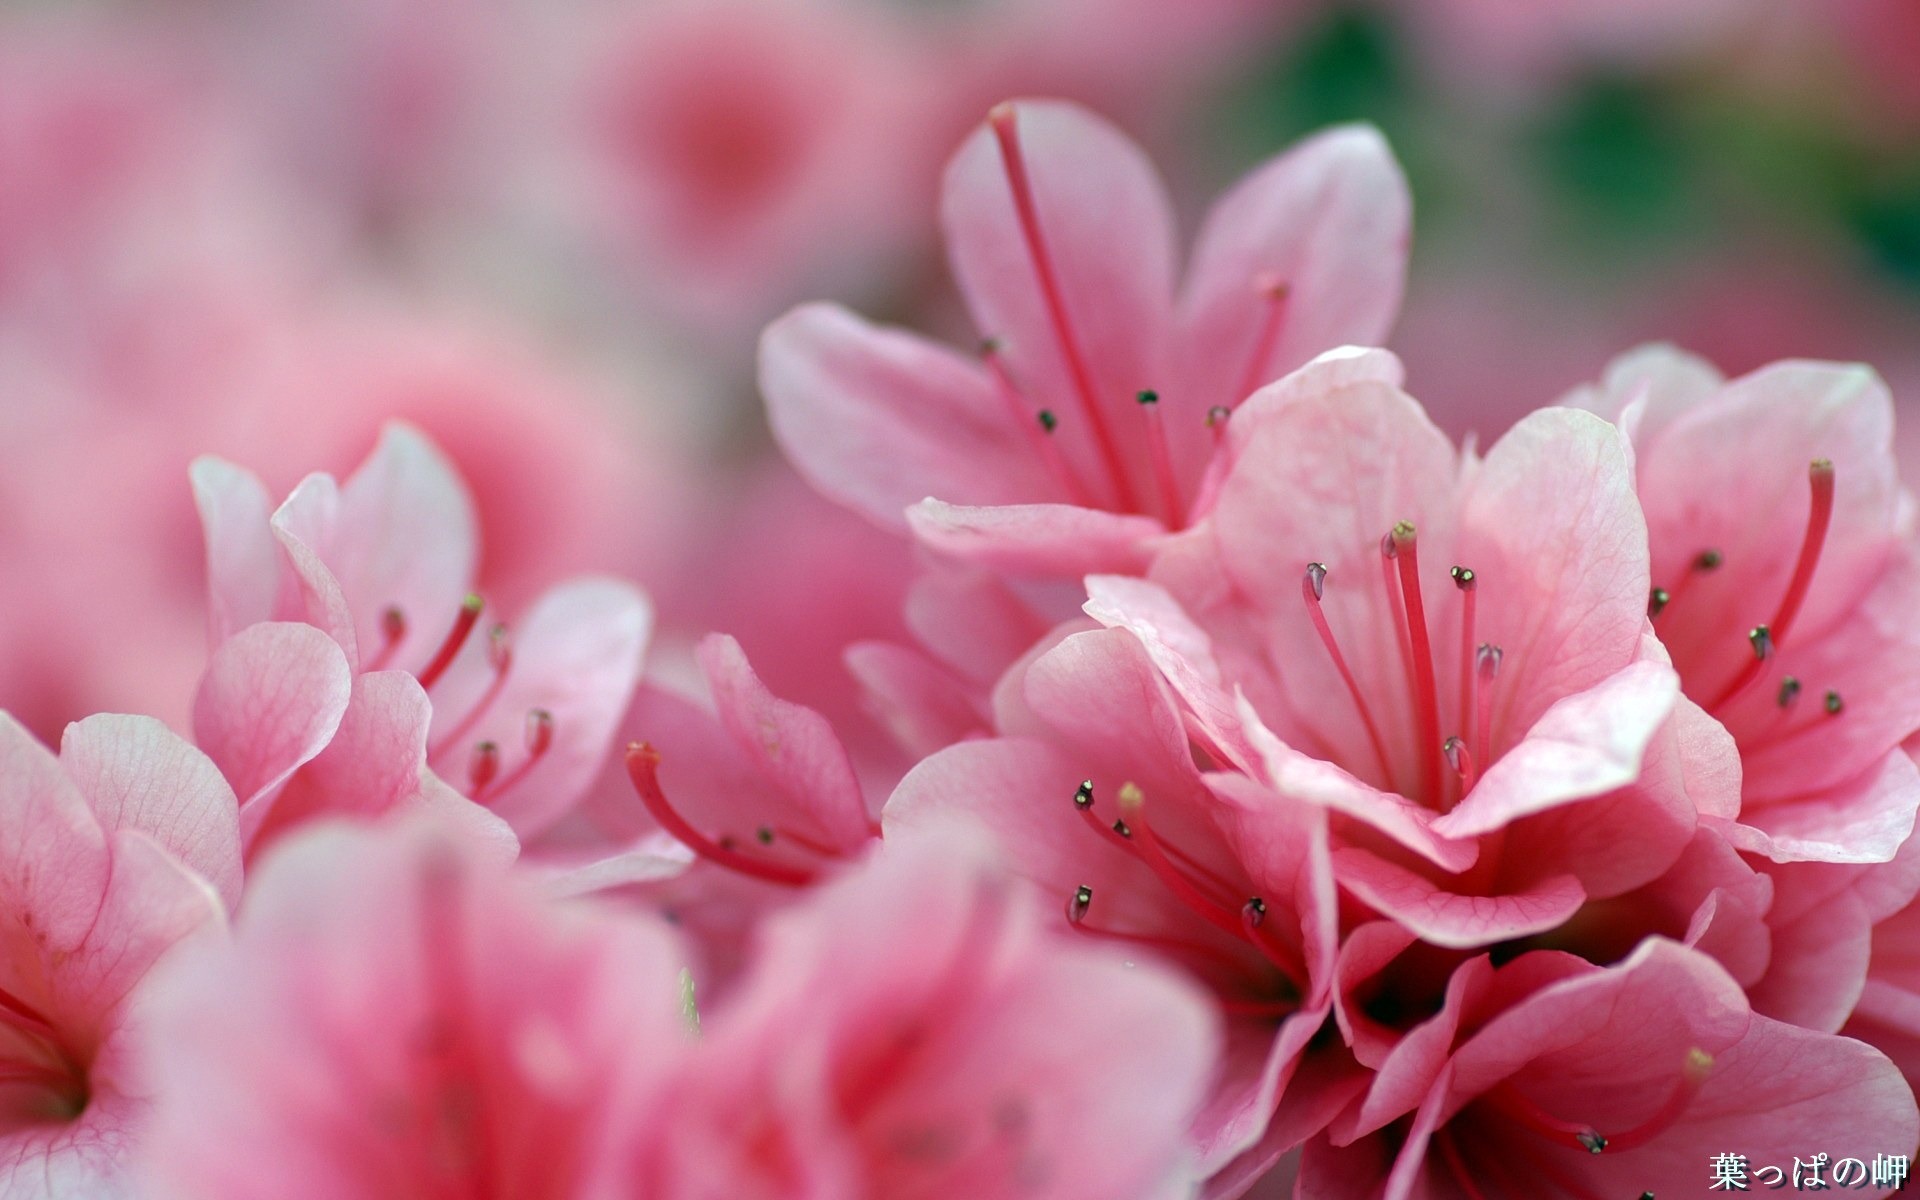 Personal Flowers HD Wallpapers #45 - 1920x1200